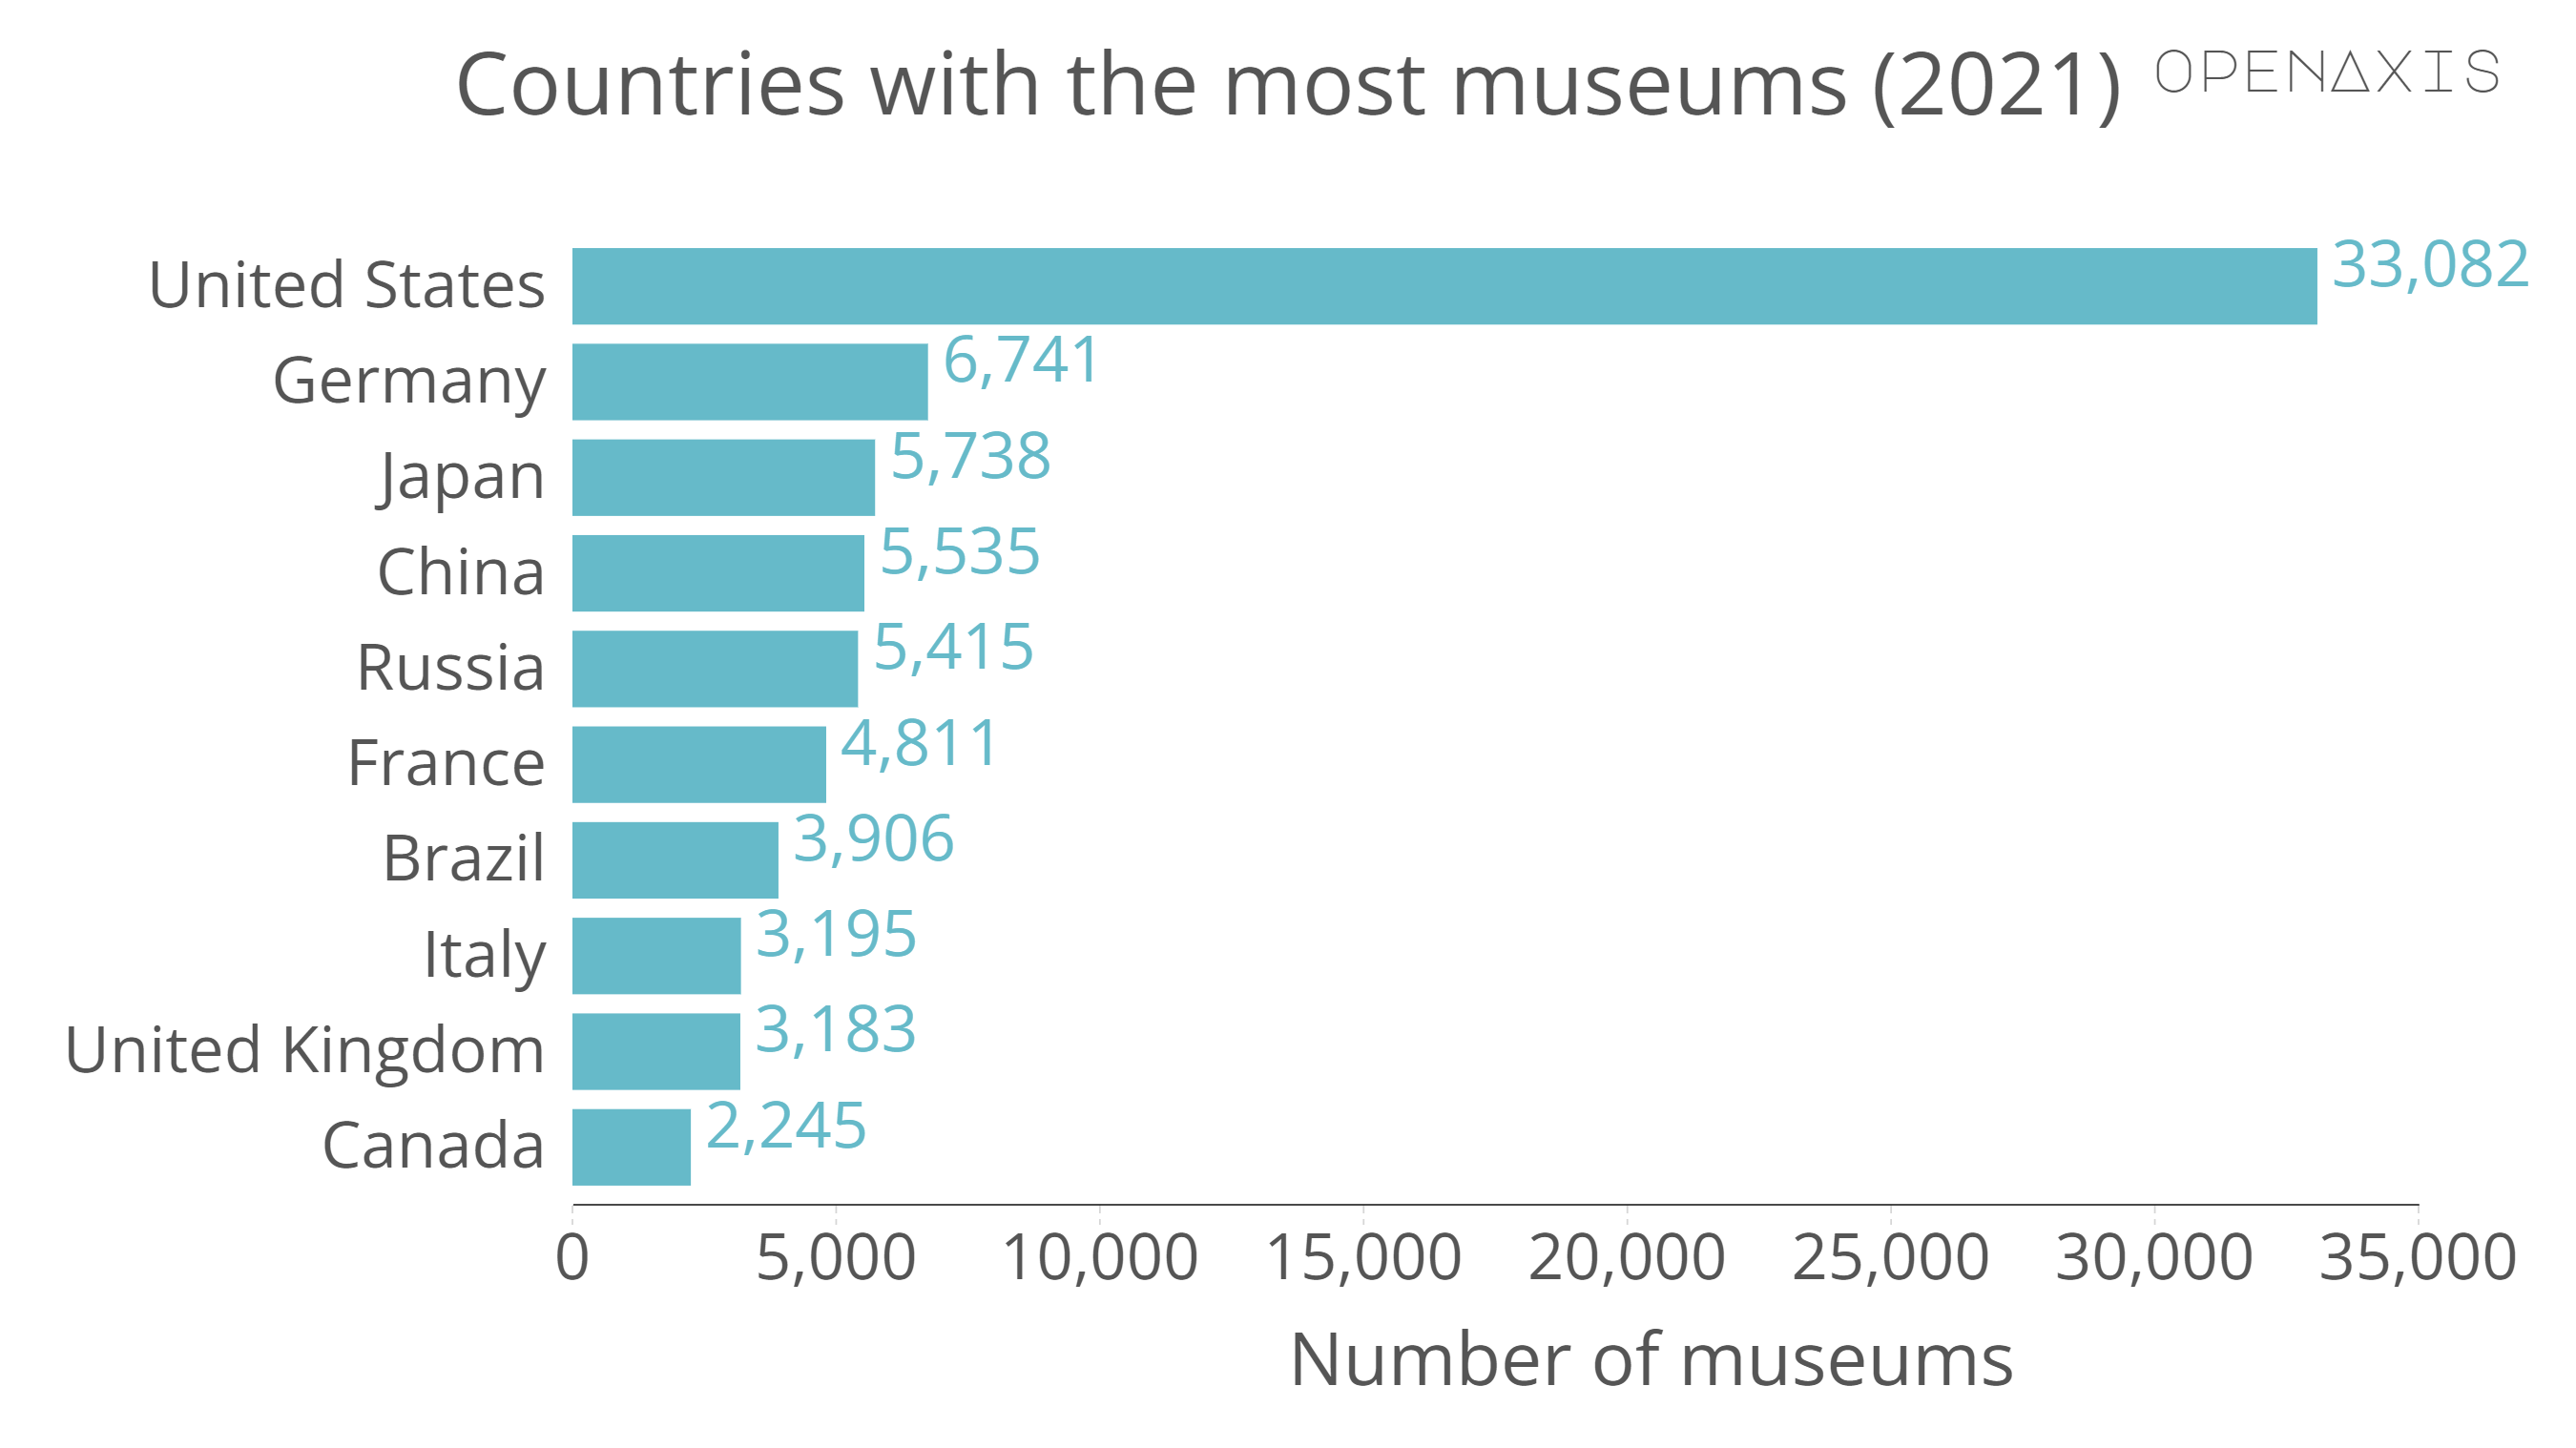 "Countries with the most museums (2021)"